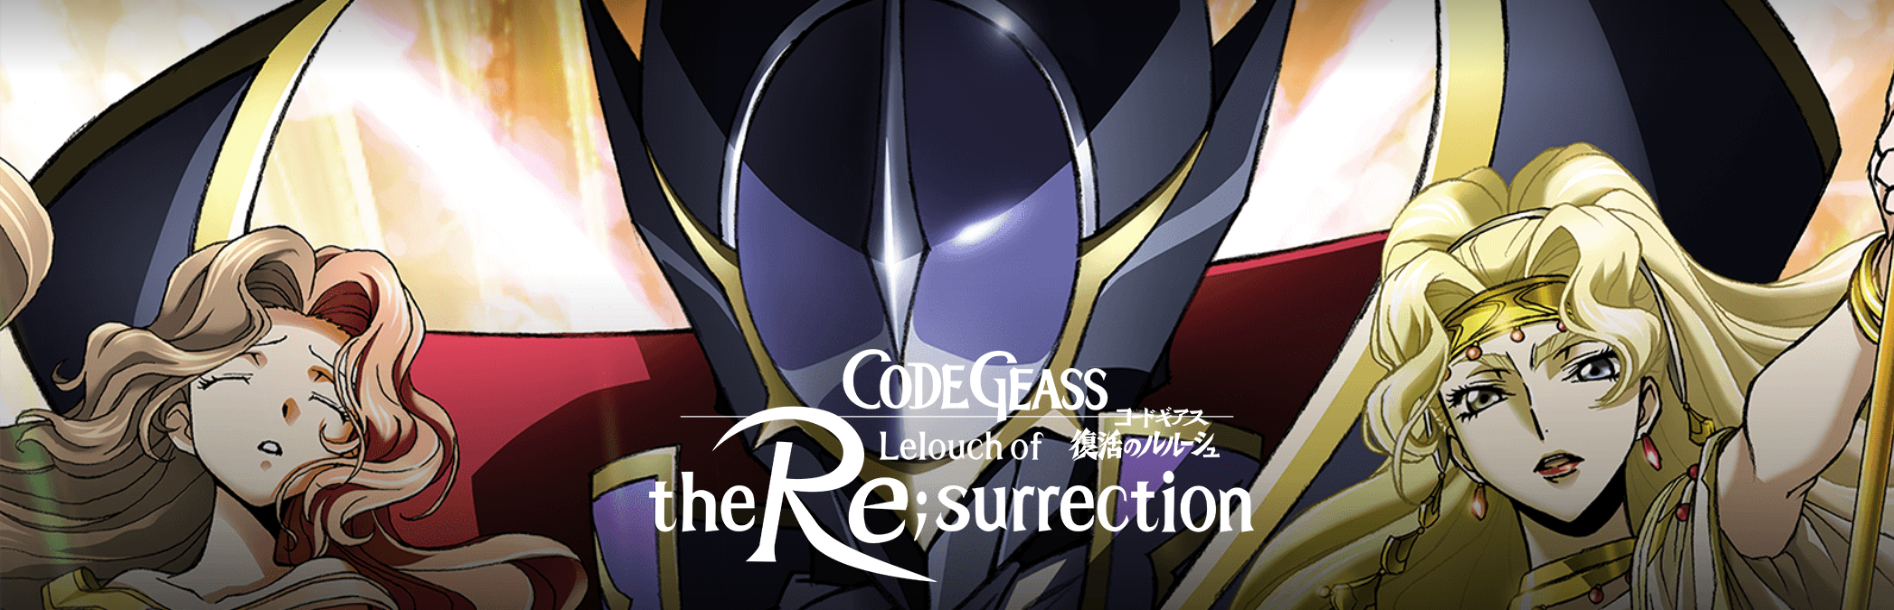 English Dub Review Code Geass Lelouch Of The Re Surrection Bubbleblabber